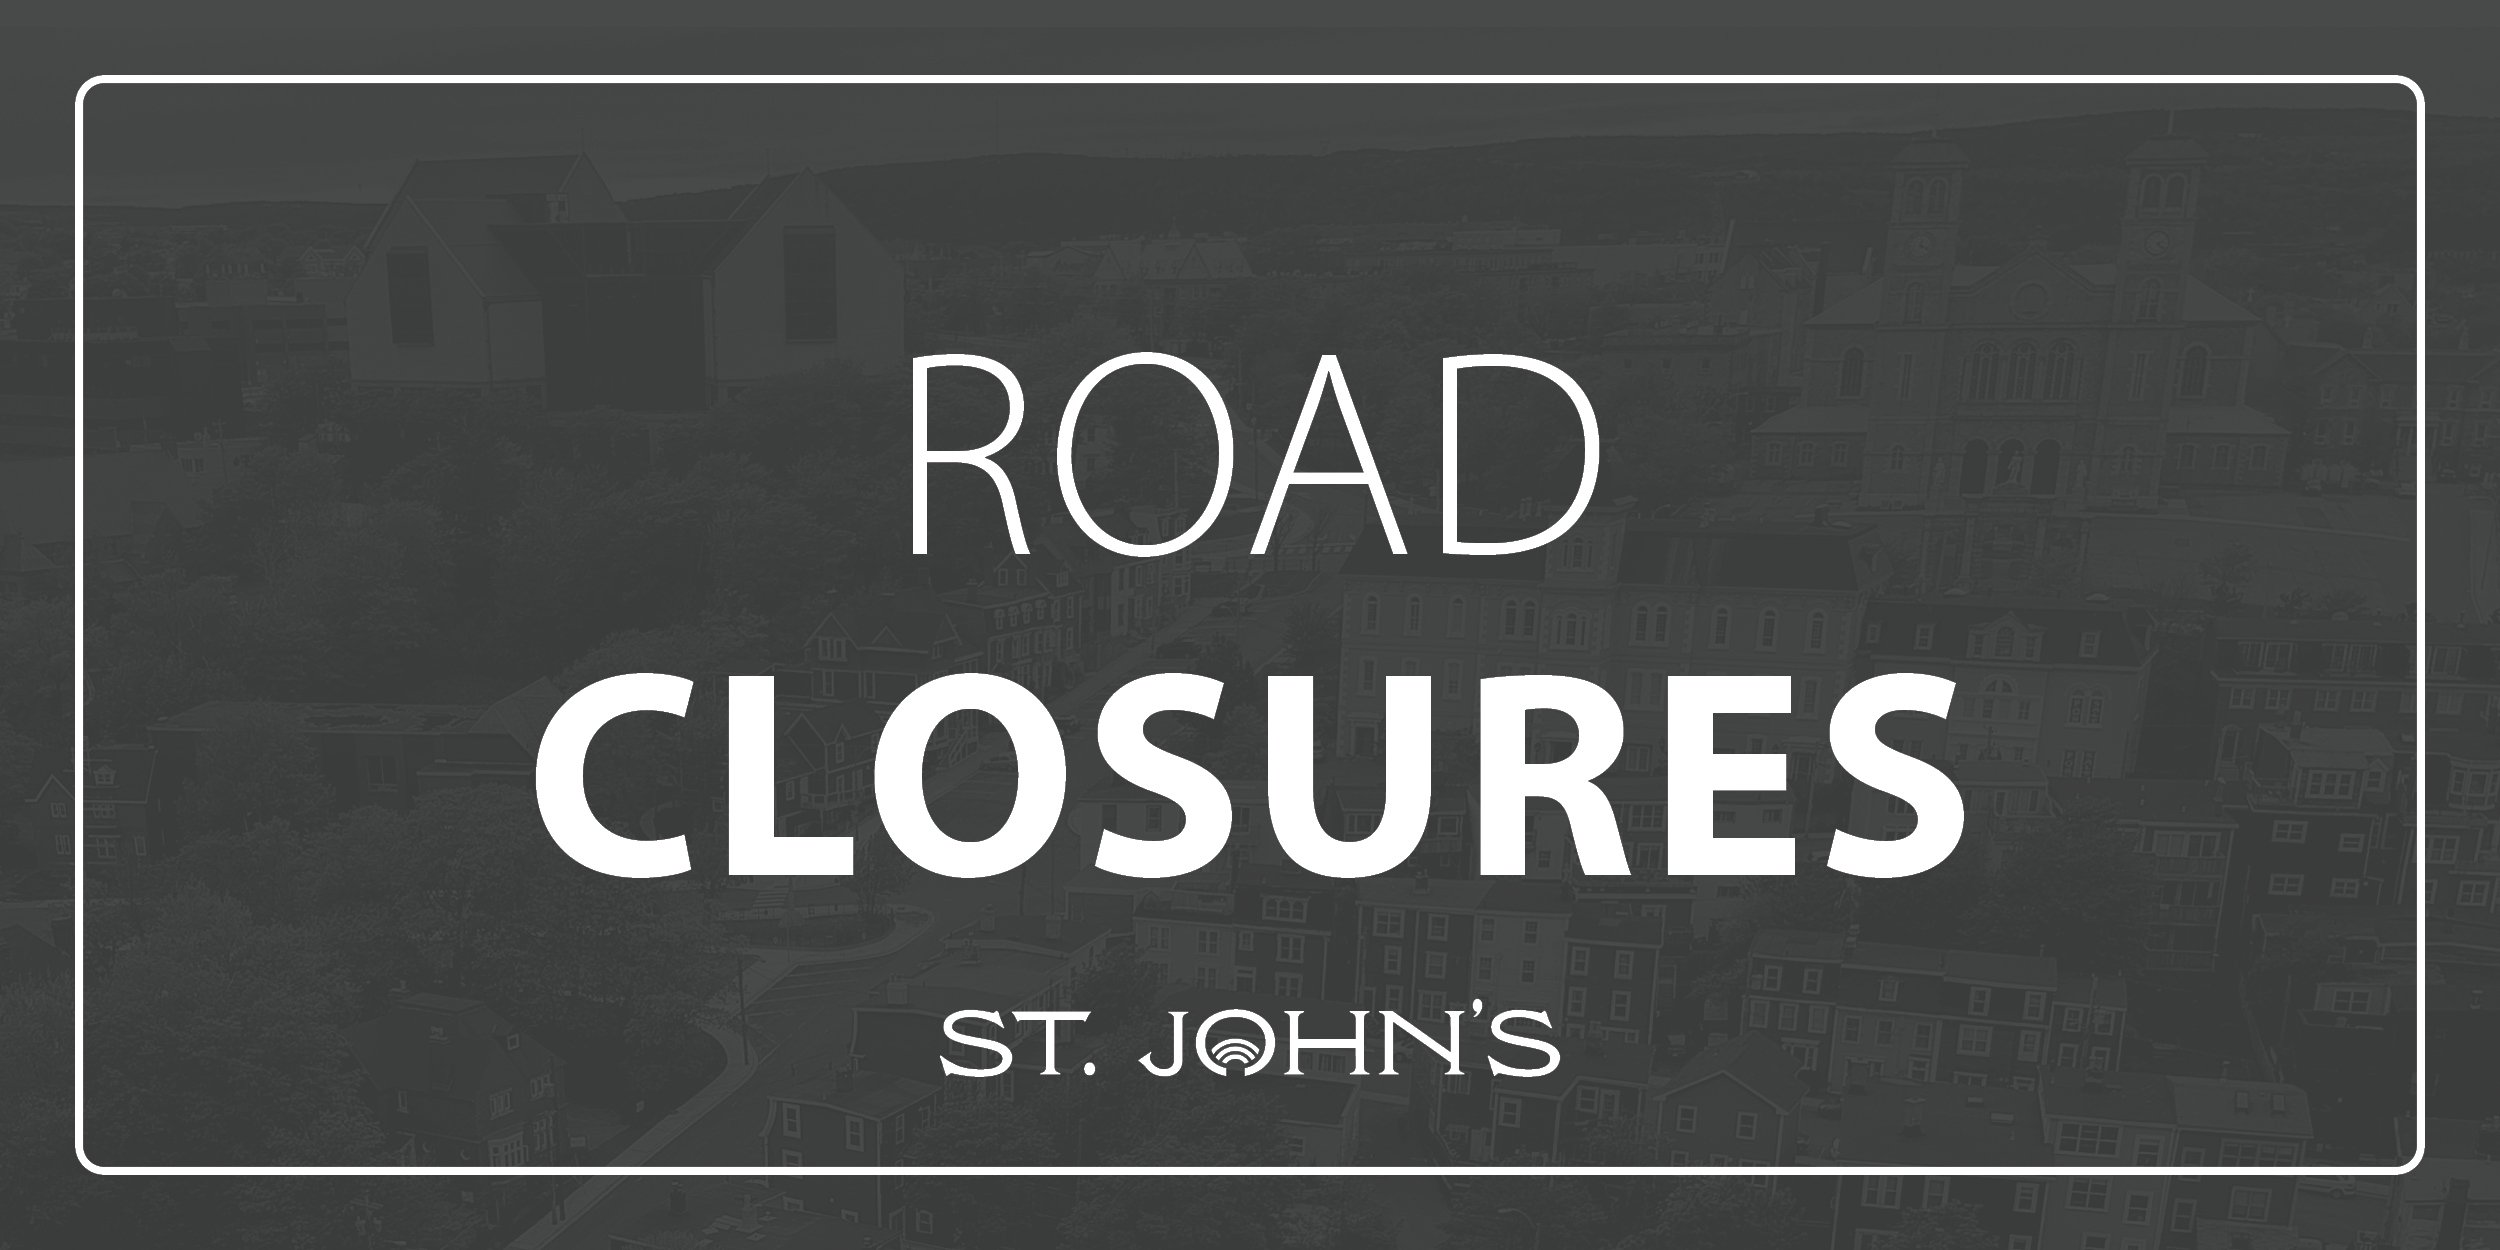 text "road closures" on a grey background 